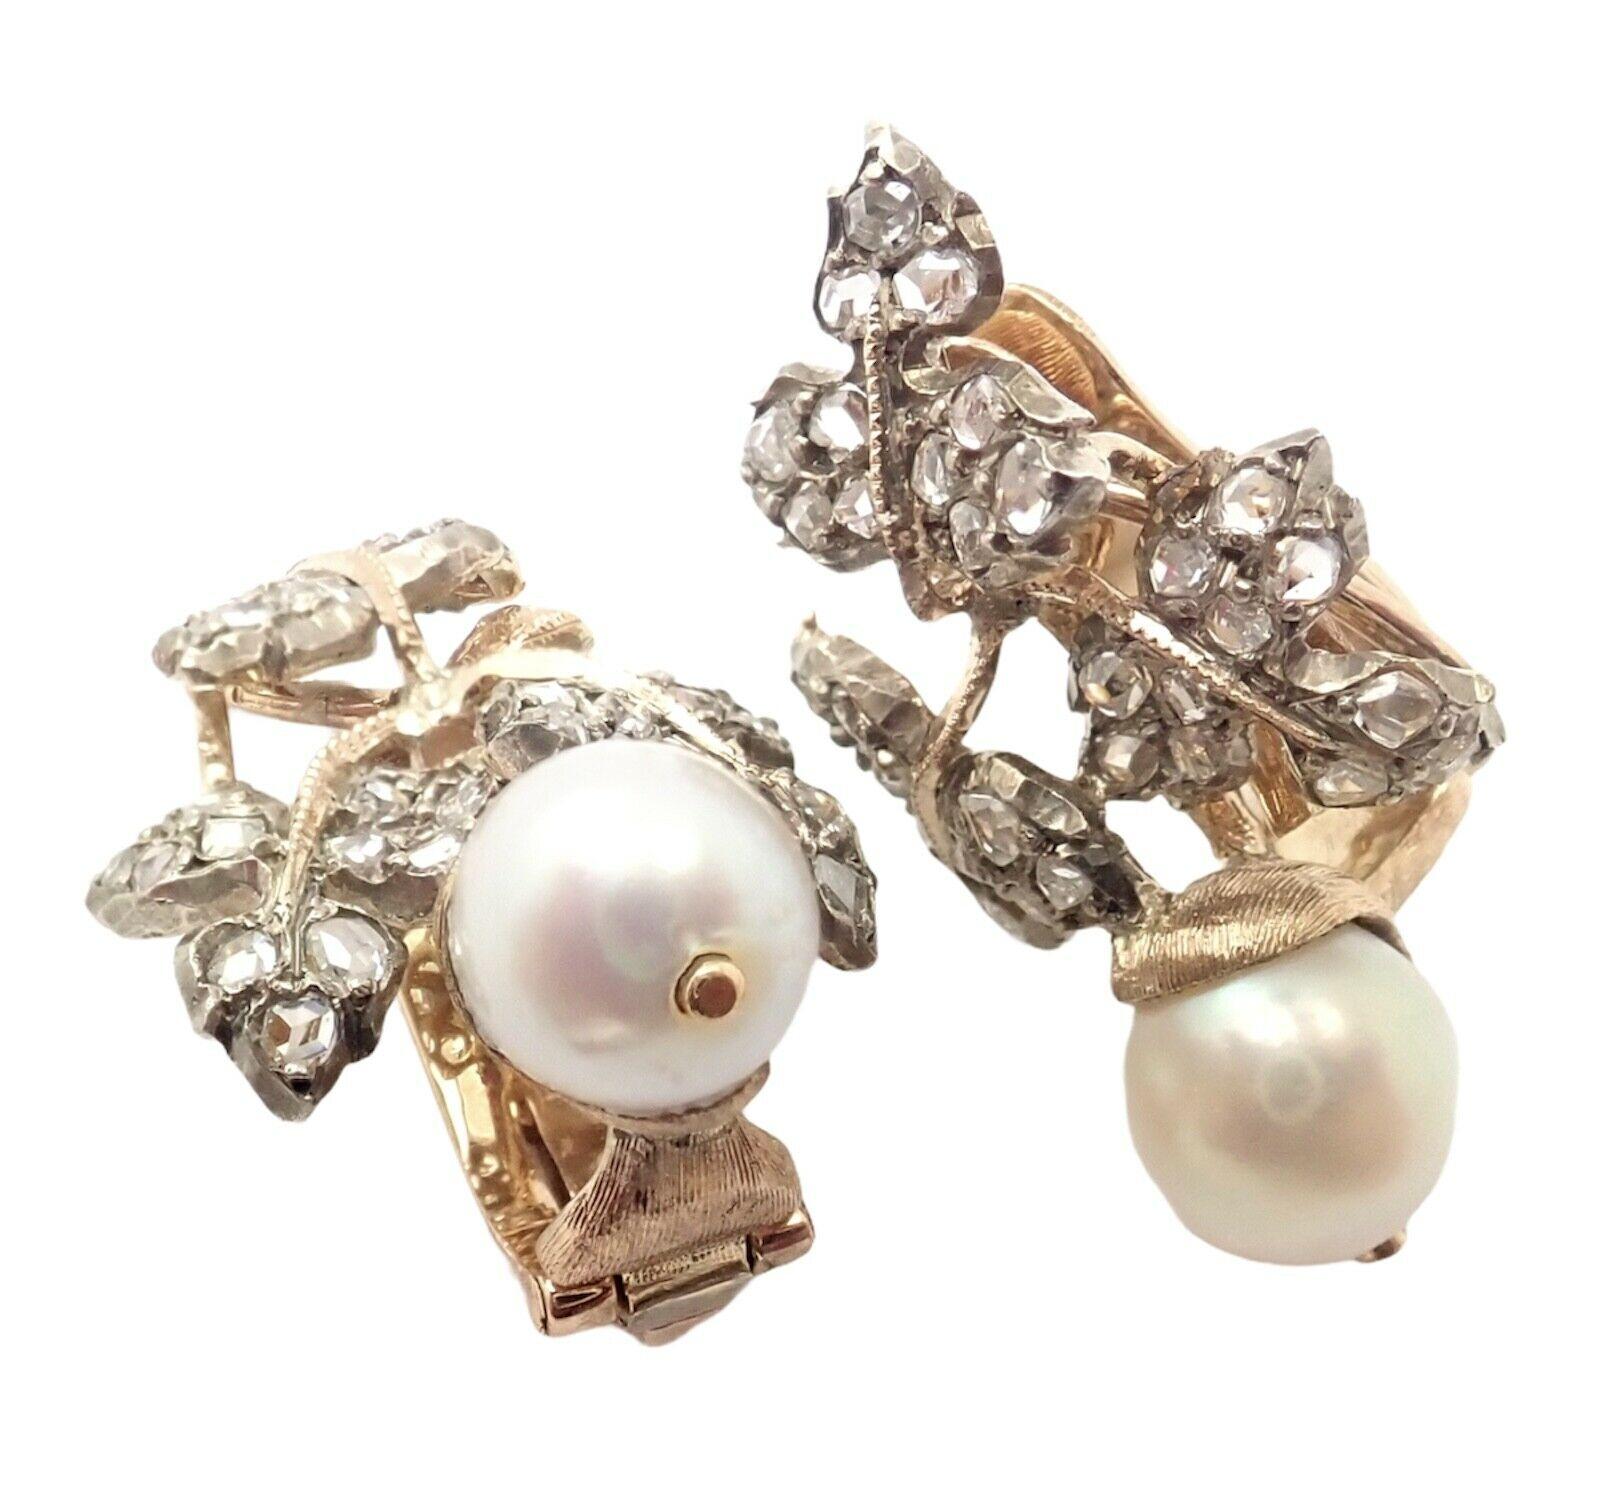 18k Yellow Gold Diamond Pearl Vintage Earrings by Gianmaria Buccellati. 
With 66 Rose Cut Diamonds Total weight is approximately  1.5ct
2 pearls 6.5mm each
These earrings are made for not pierced ears, but they can be converted by adding